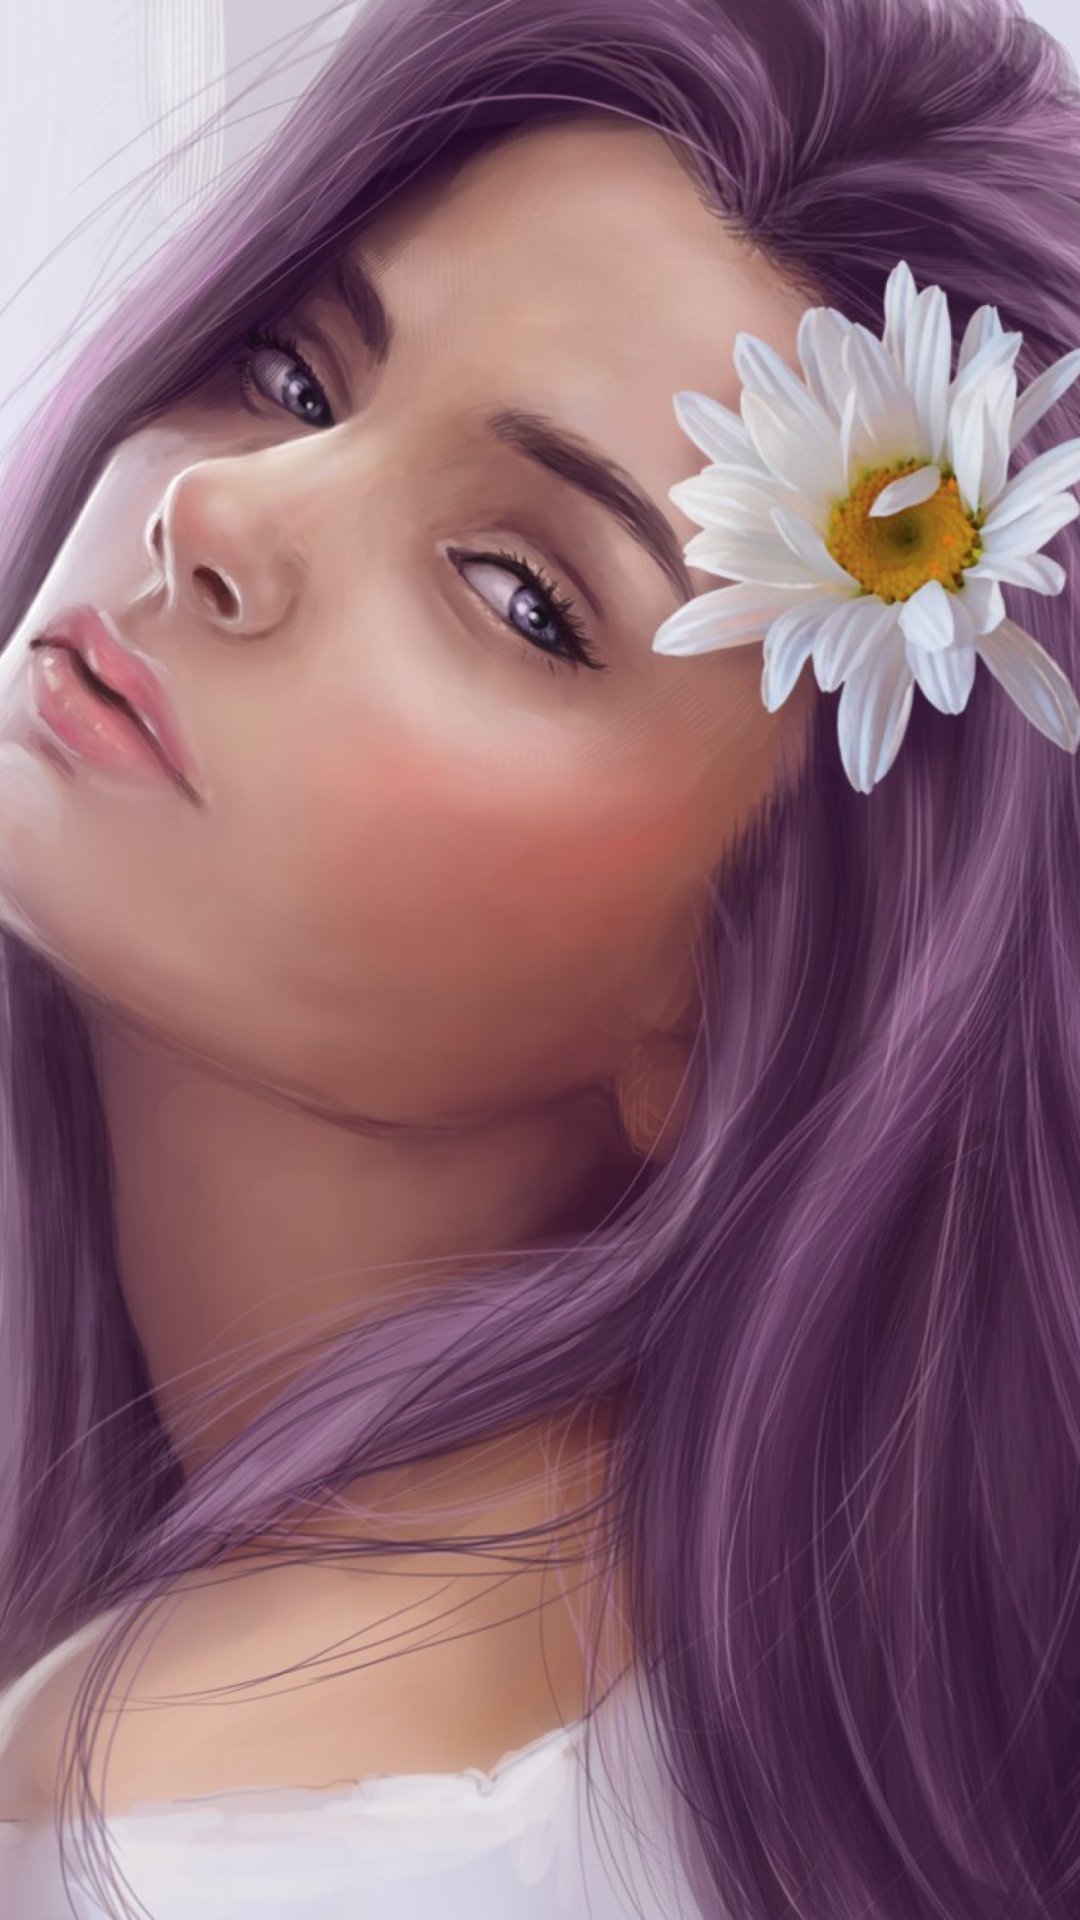 Das Girl With Purple Hair Painting Wallpaper 1080x1920